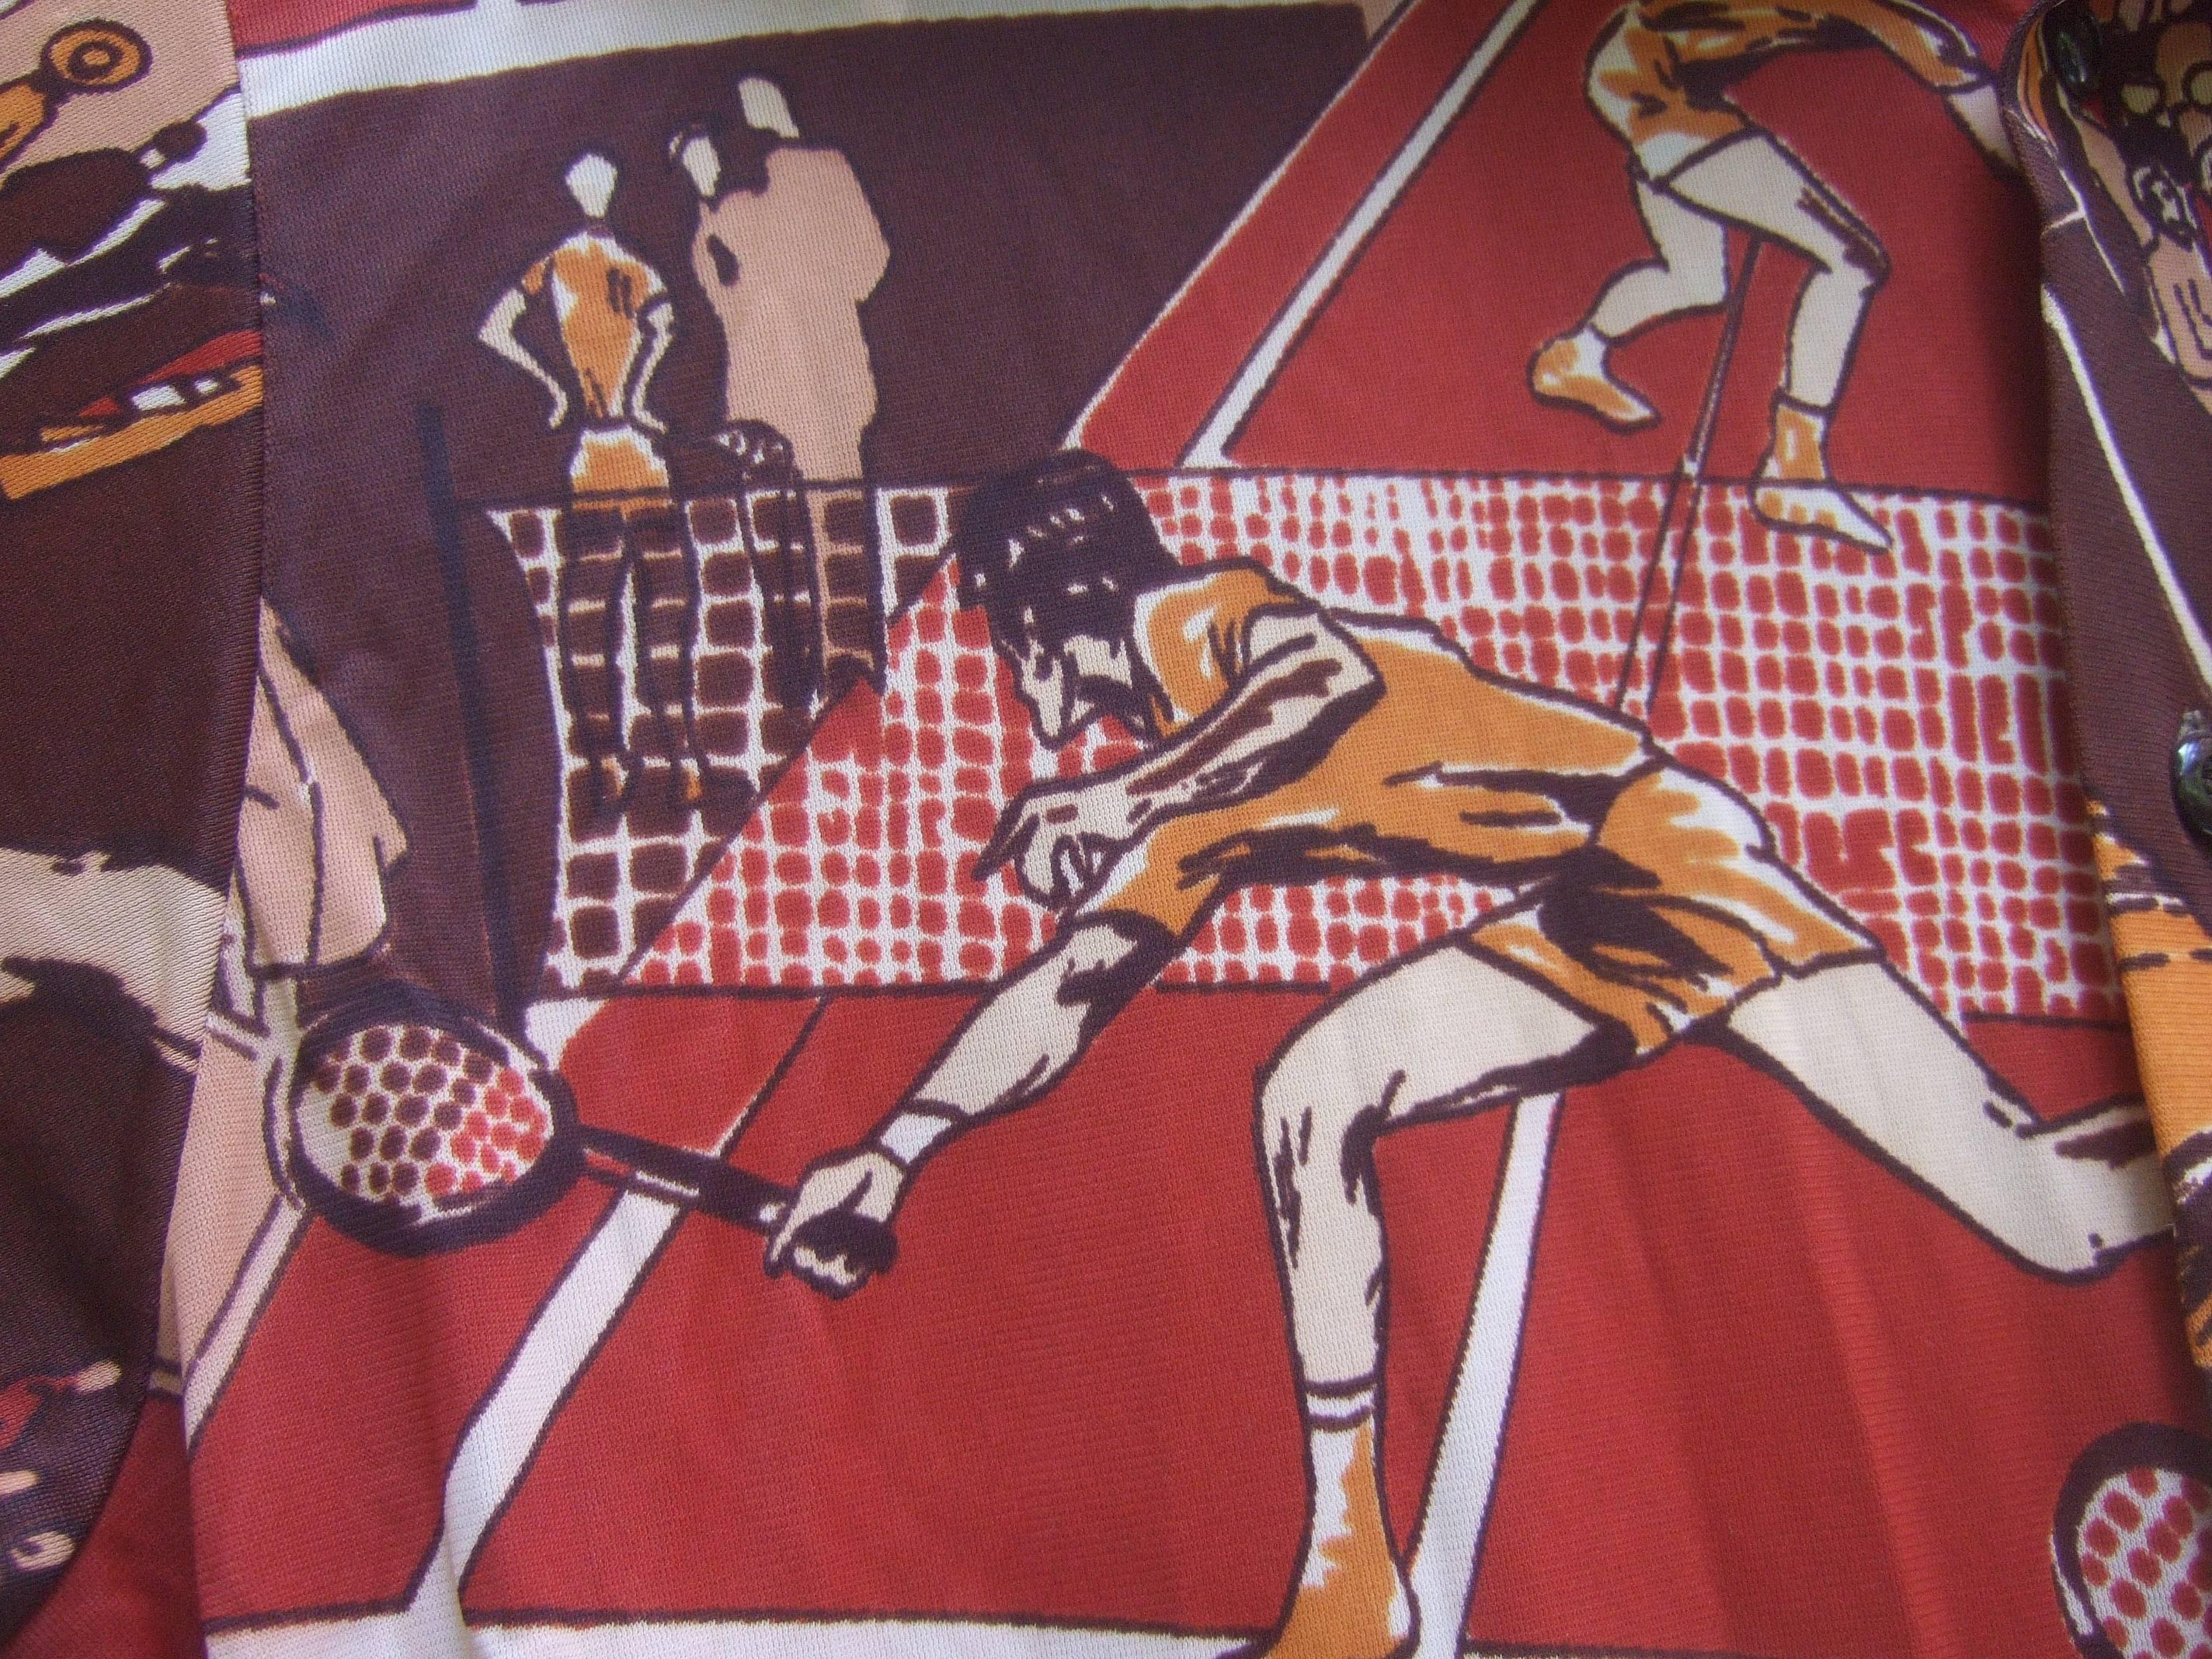 Men's Mod 1970s Polyester Tennis Theme Shirt In Excellent Condition For Sale In University City, MO